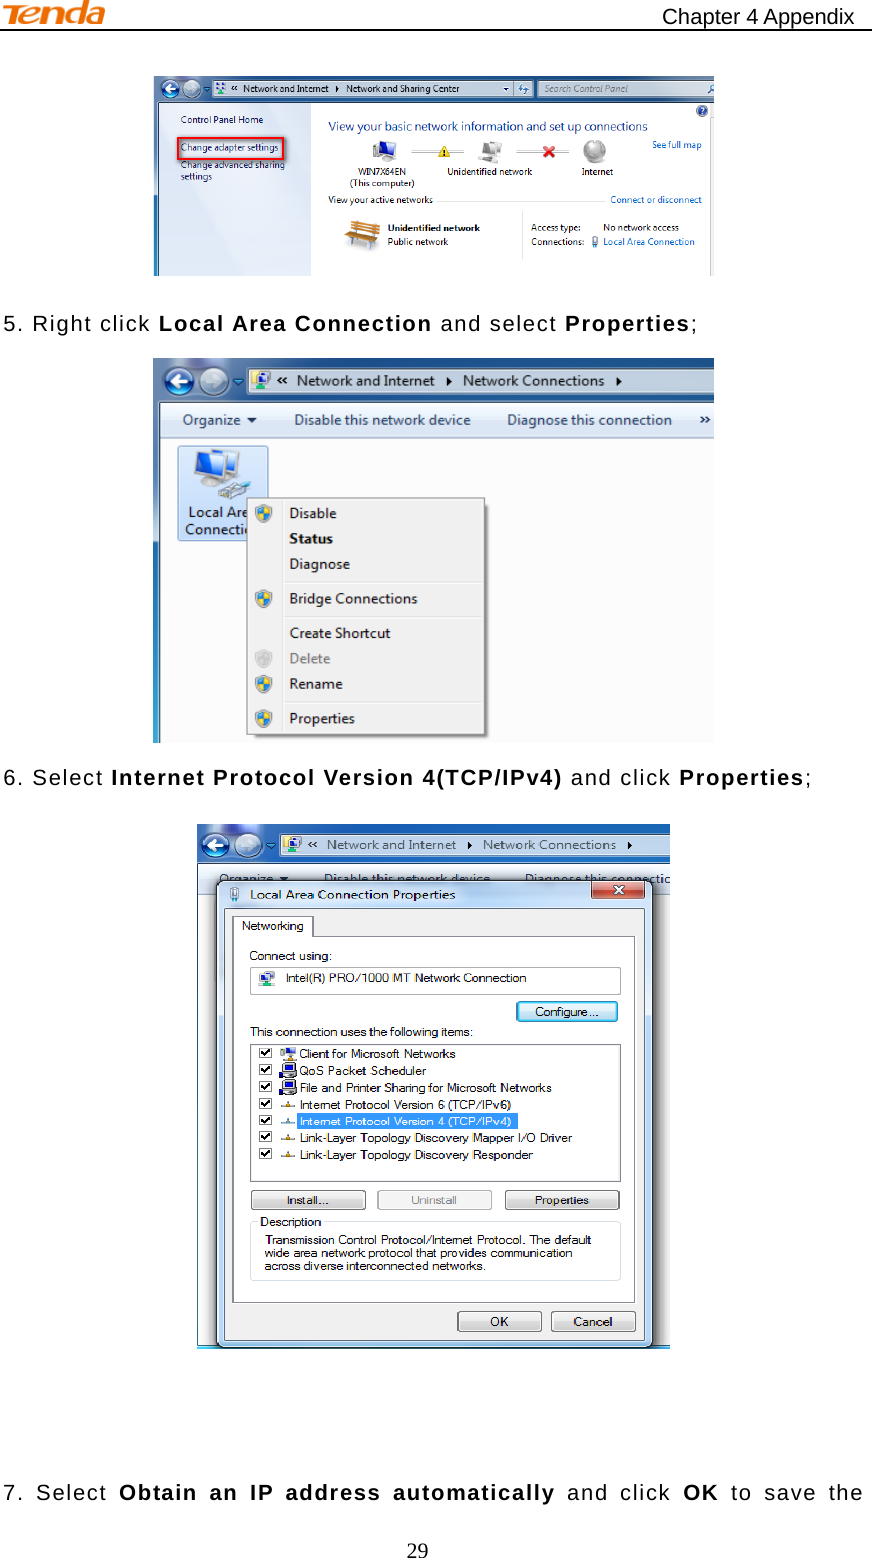                                                    Chapter 4 Appendix 29  5. Right click Local Area Connection and select Properties;  6. Select Internet Protocol Version 4(TCP/IPv4) and click Properties;    7. Select Obtain an IP address automatically and click OK to save the 